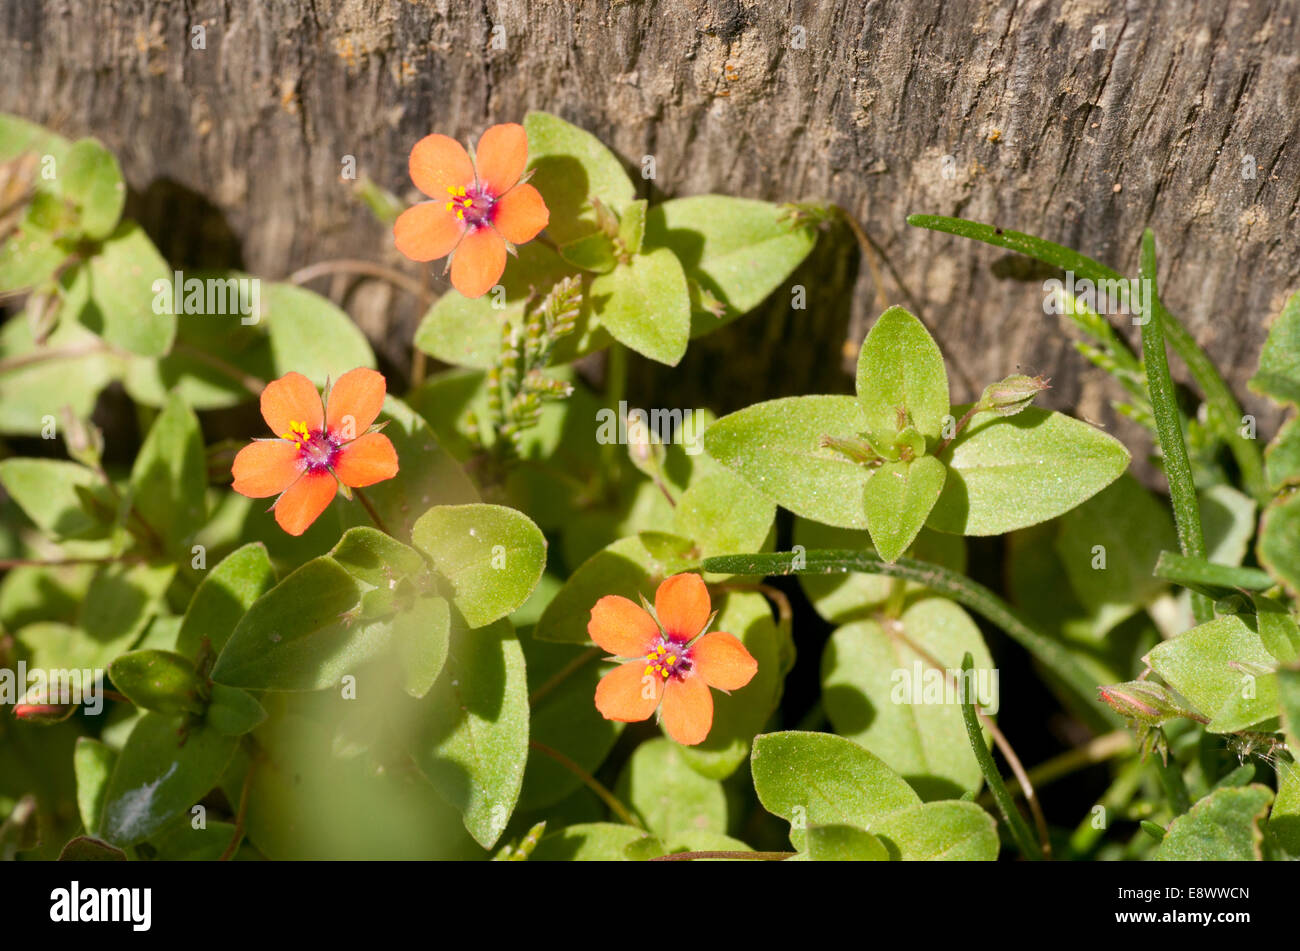 Three flowers of Scarlet Pimpernel against a bark and green leaf background taken at Seaford, East Sussex Stock Photo